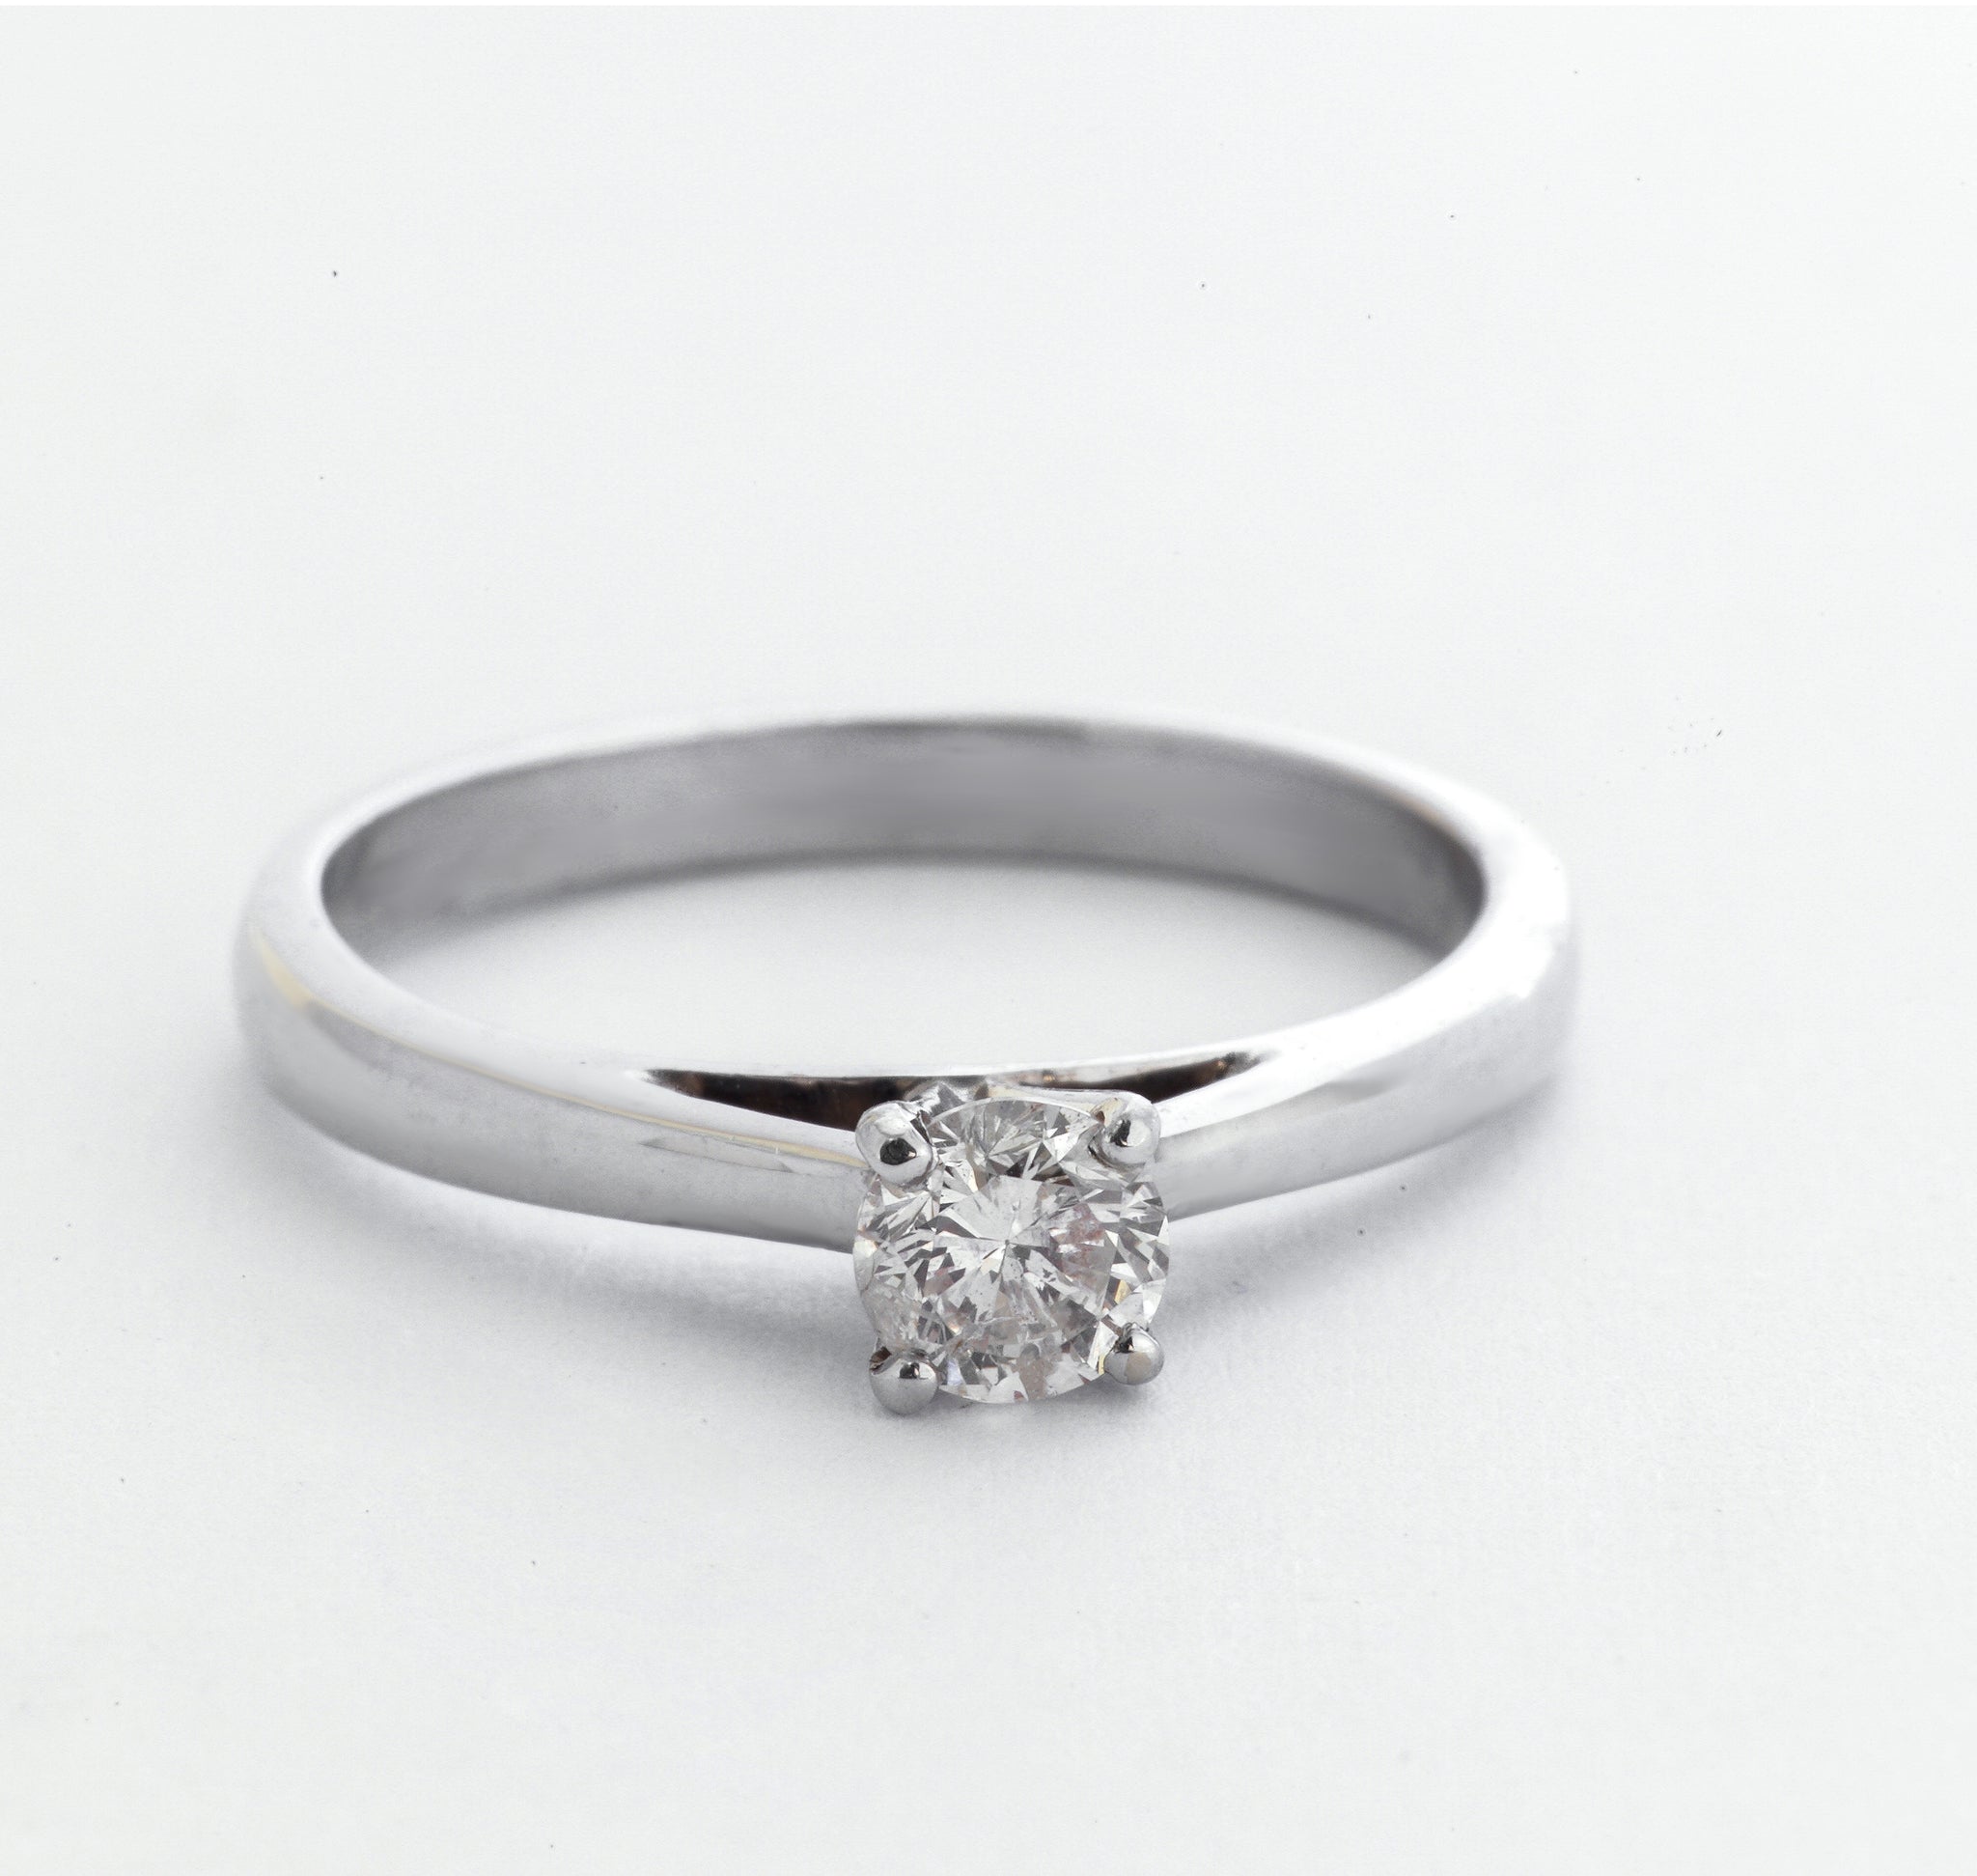 Amada 14K White Gold Engagement Rings With Diamond, 40% OFF